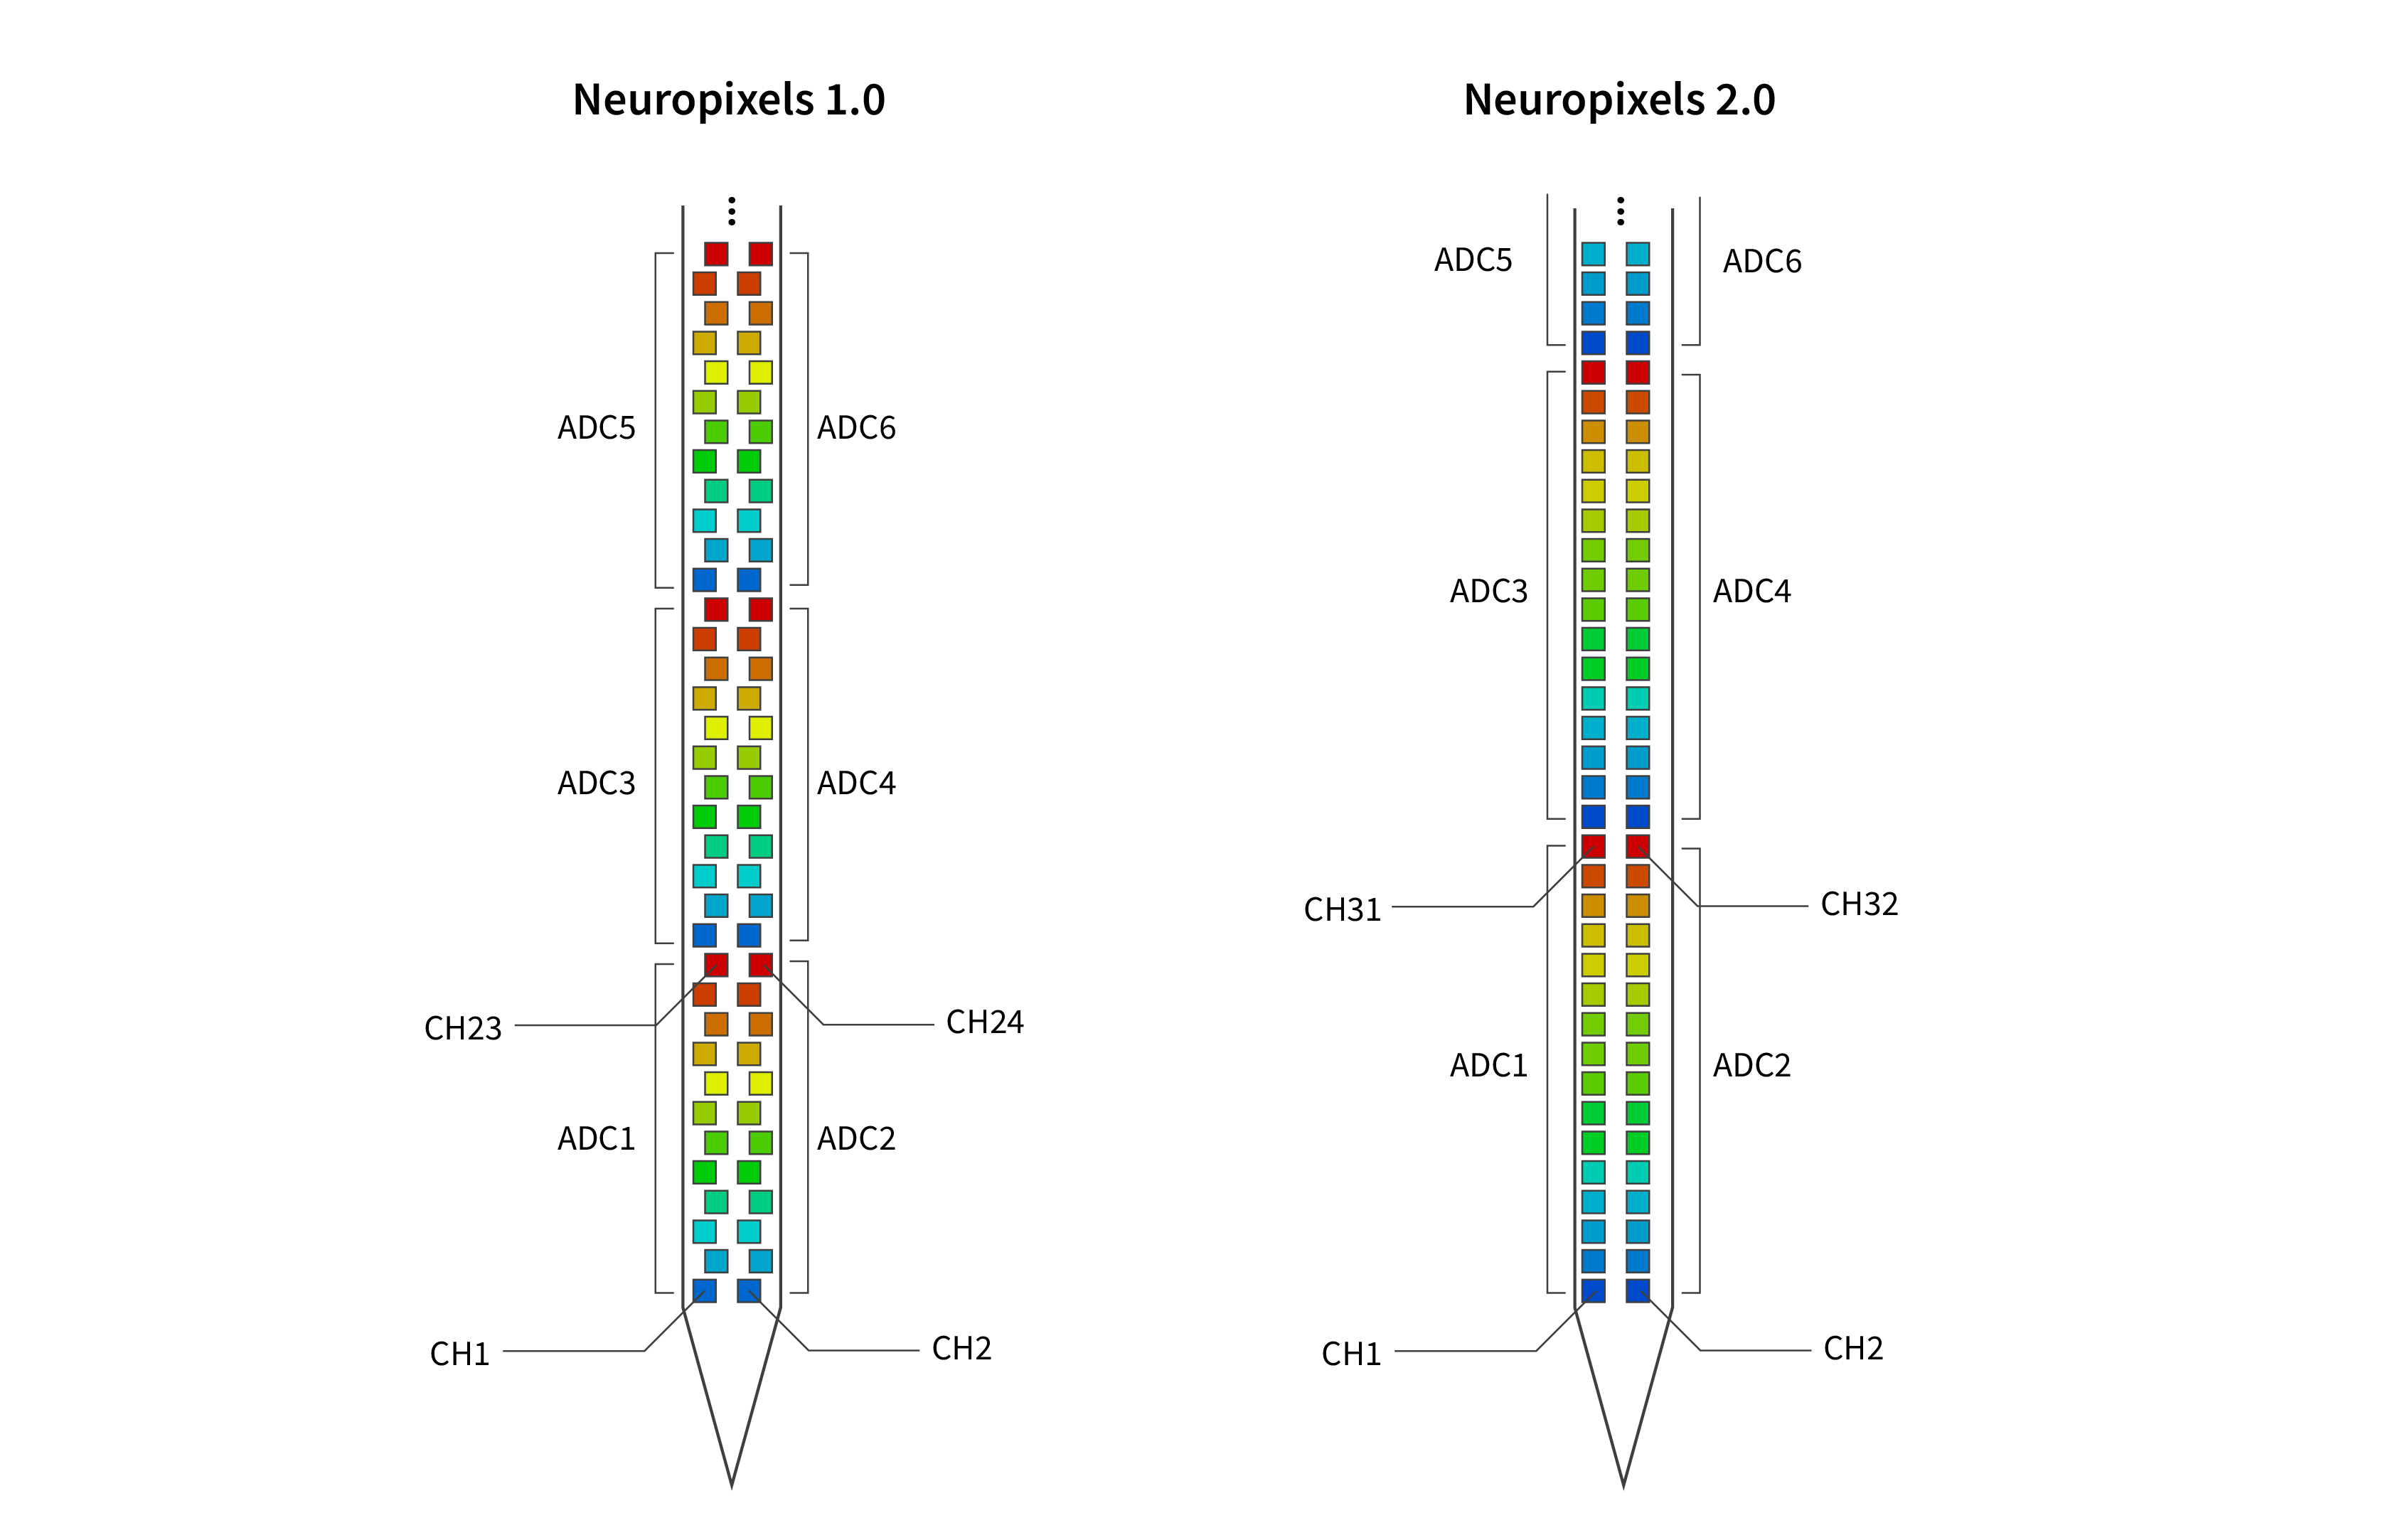 Annotated Neuropixels 1.0 and 2.0 shanks